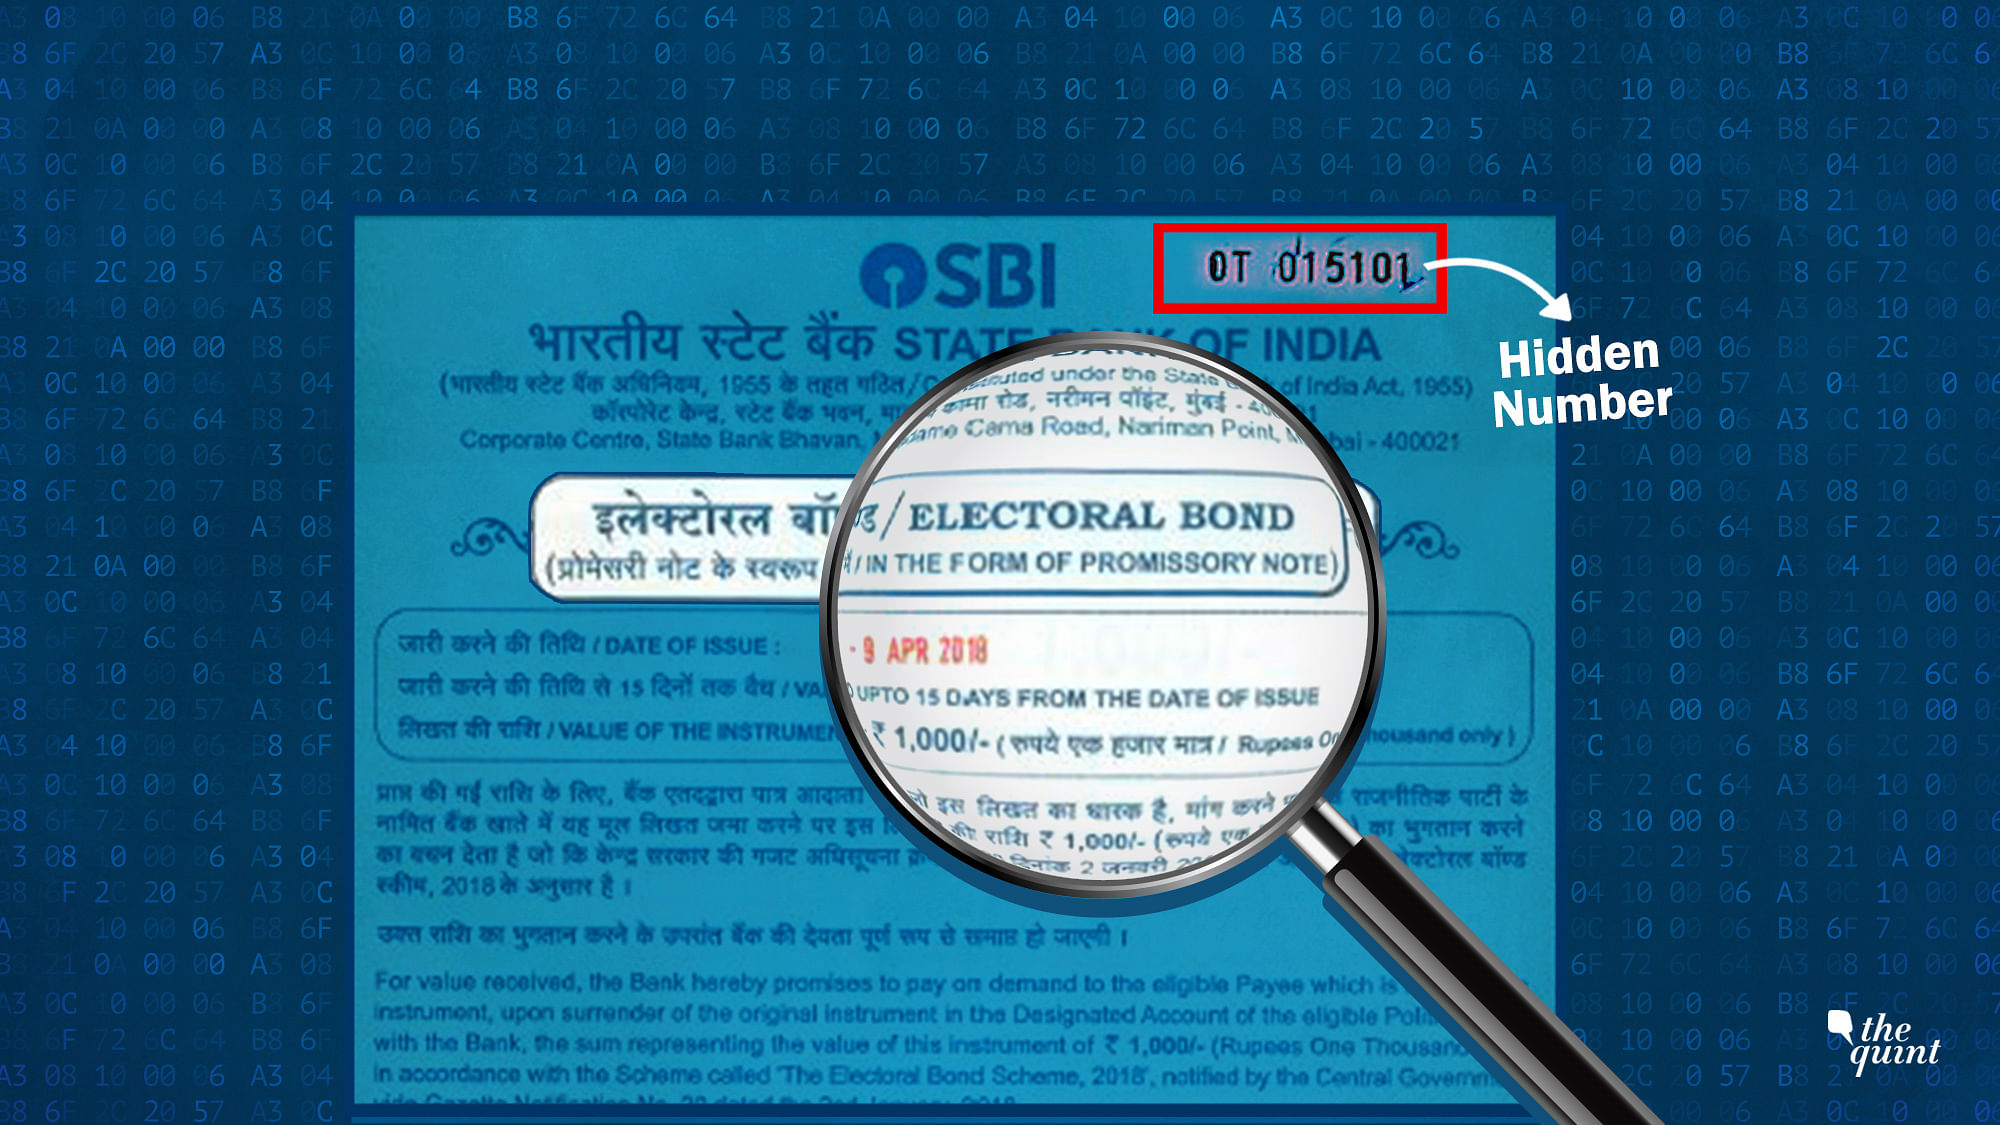 <b>The Quint</b>’s investigation reveals that electoral bonds have hidden numbers printed on them.